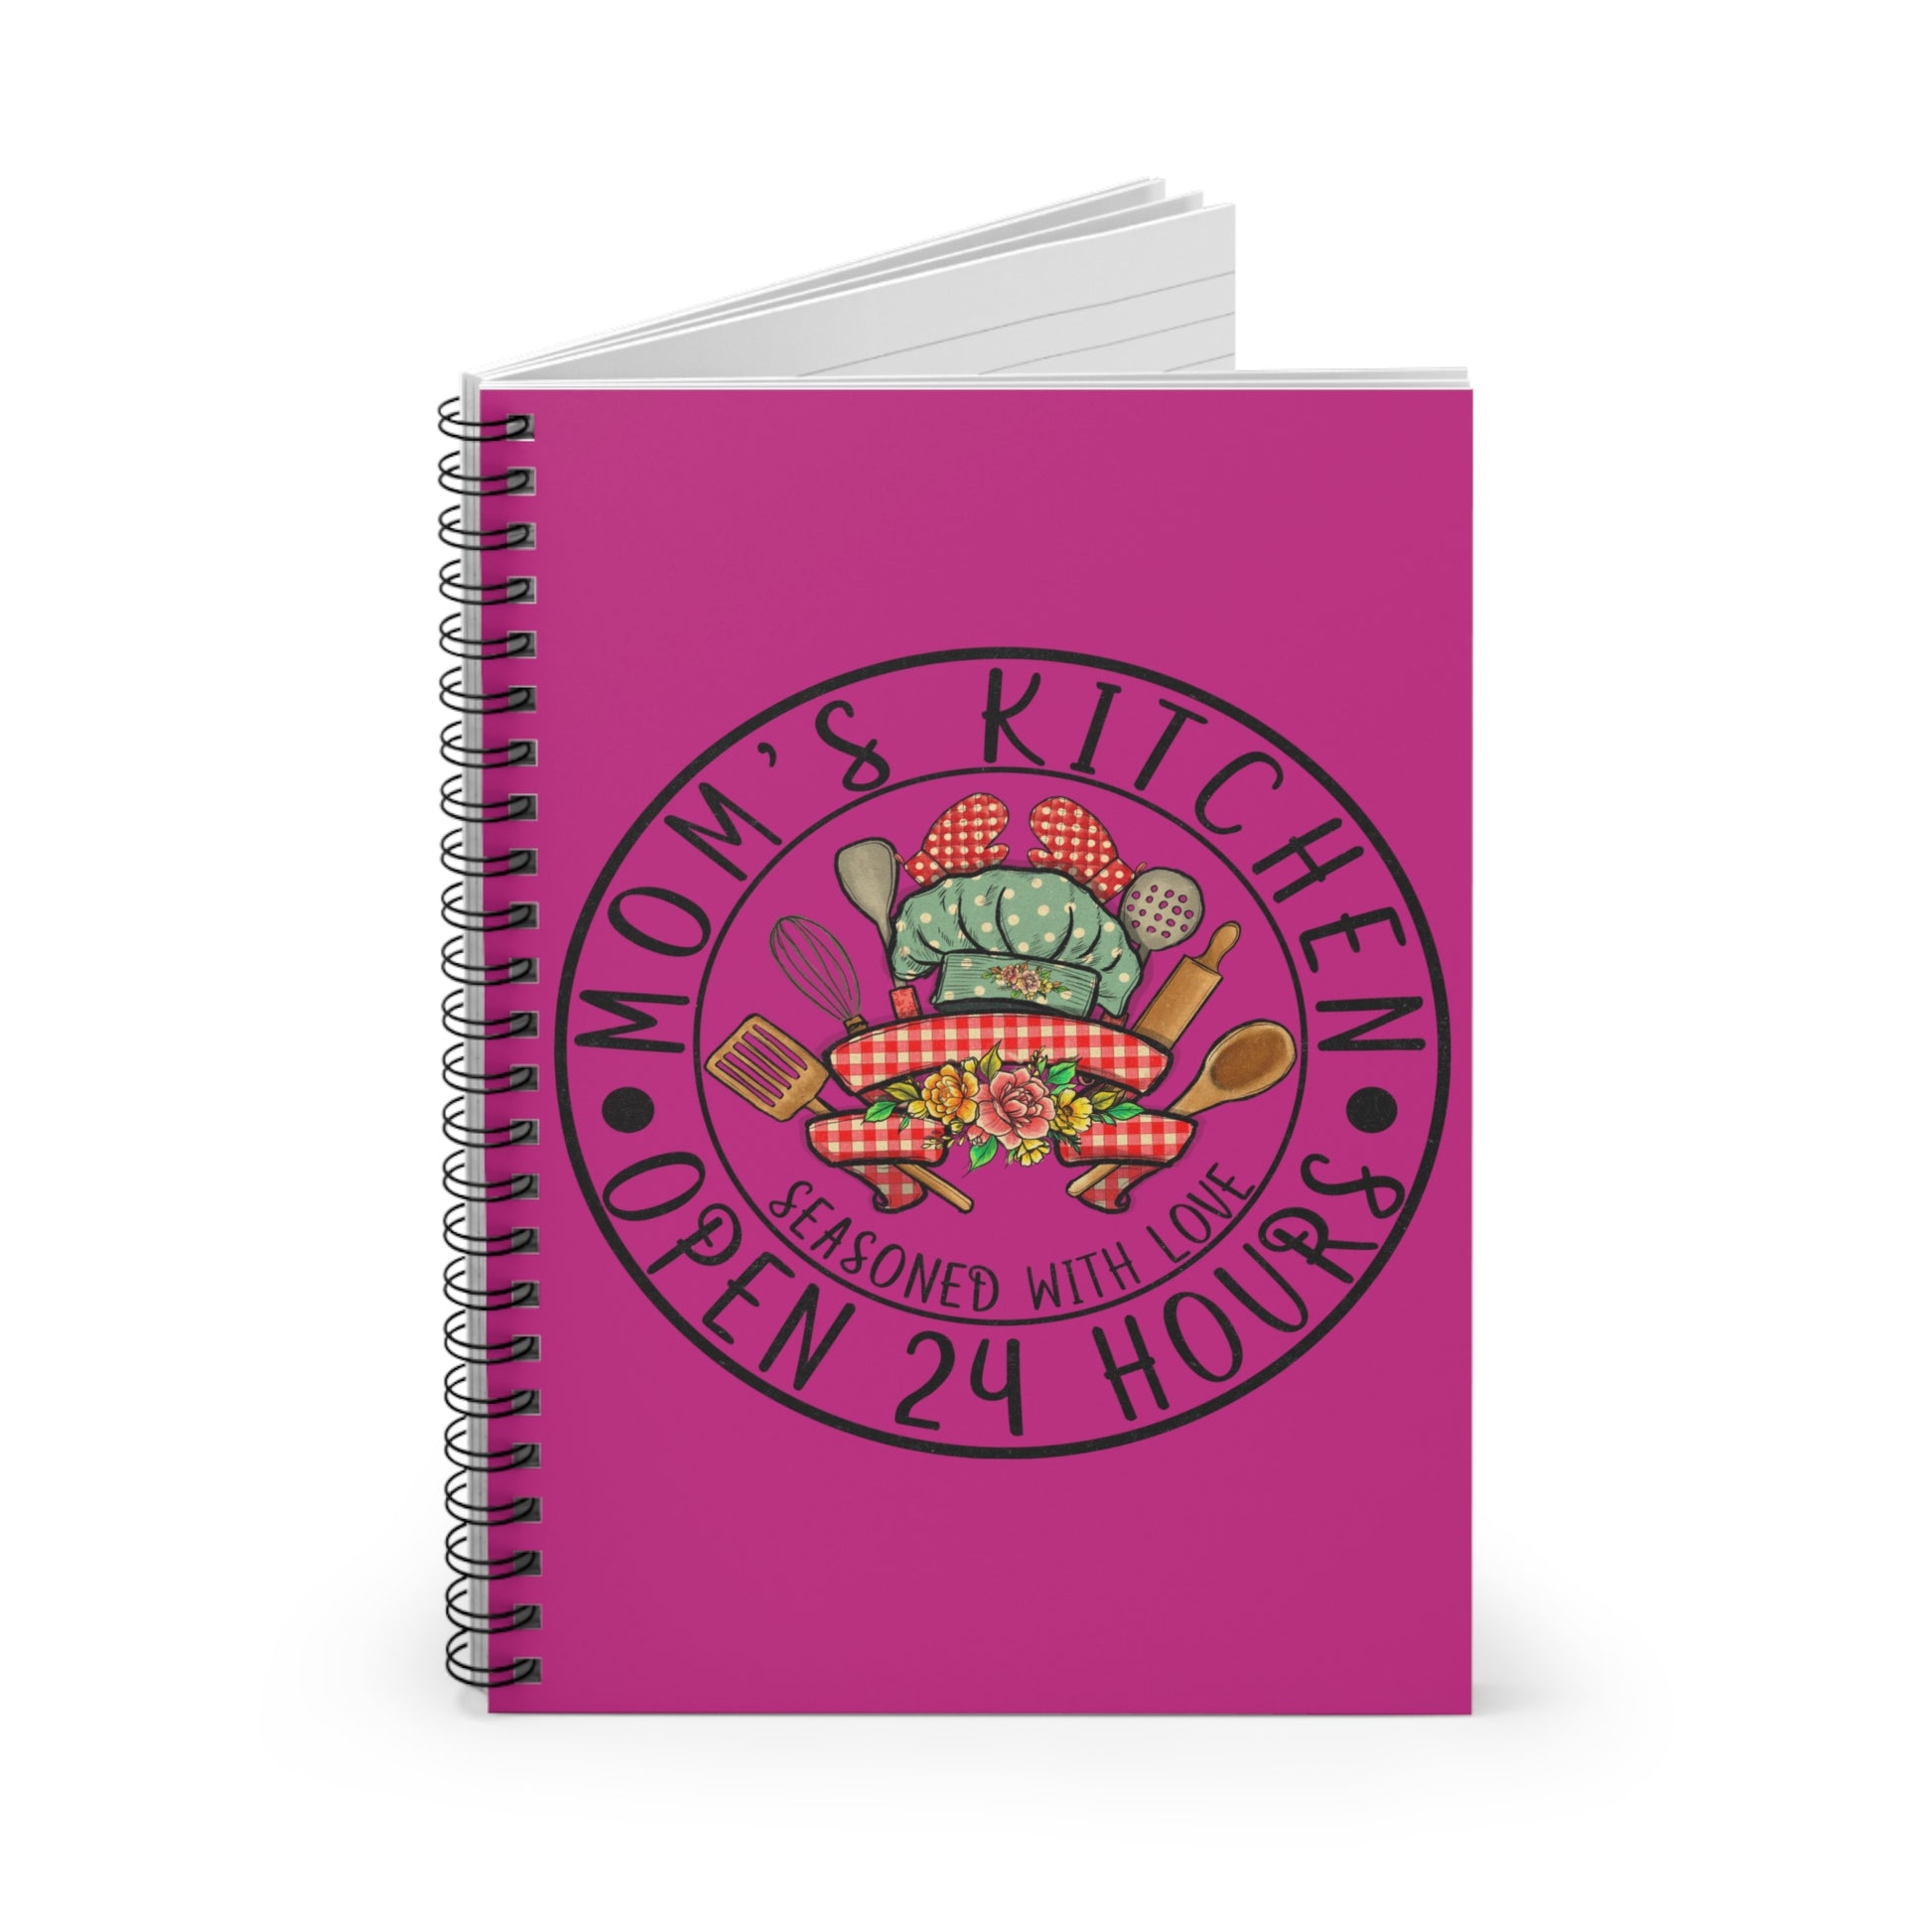 Mom's Kitchen - I Love You: Spiral Notebook - Log Books - Journals - Diaries - and More Custom Printed by TheGlassyLass